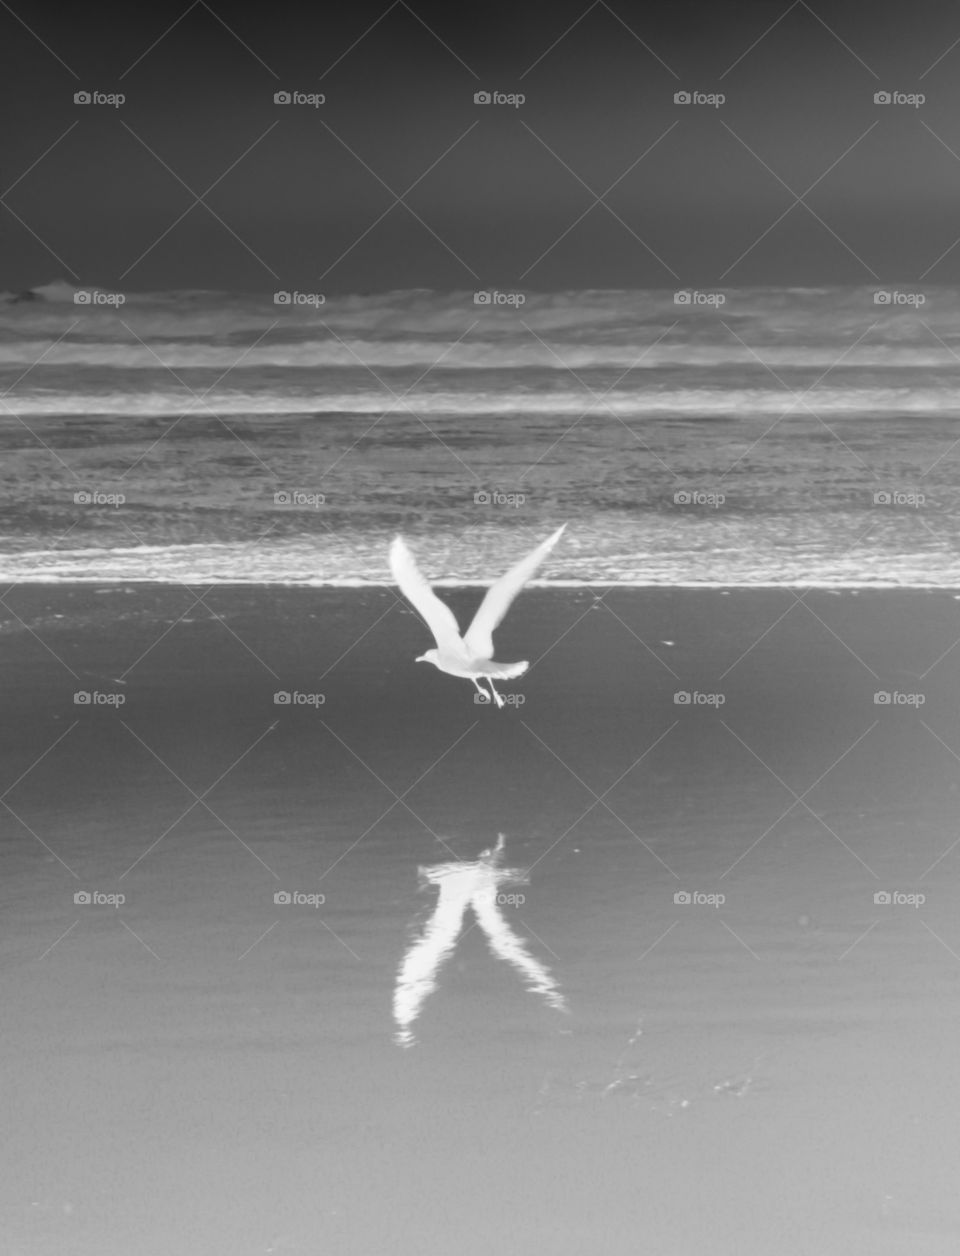 Seagull reflected on ocean shore in black and white 